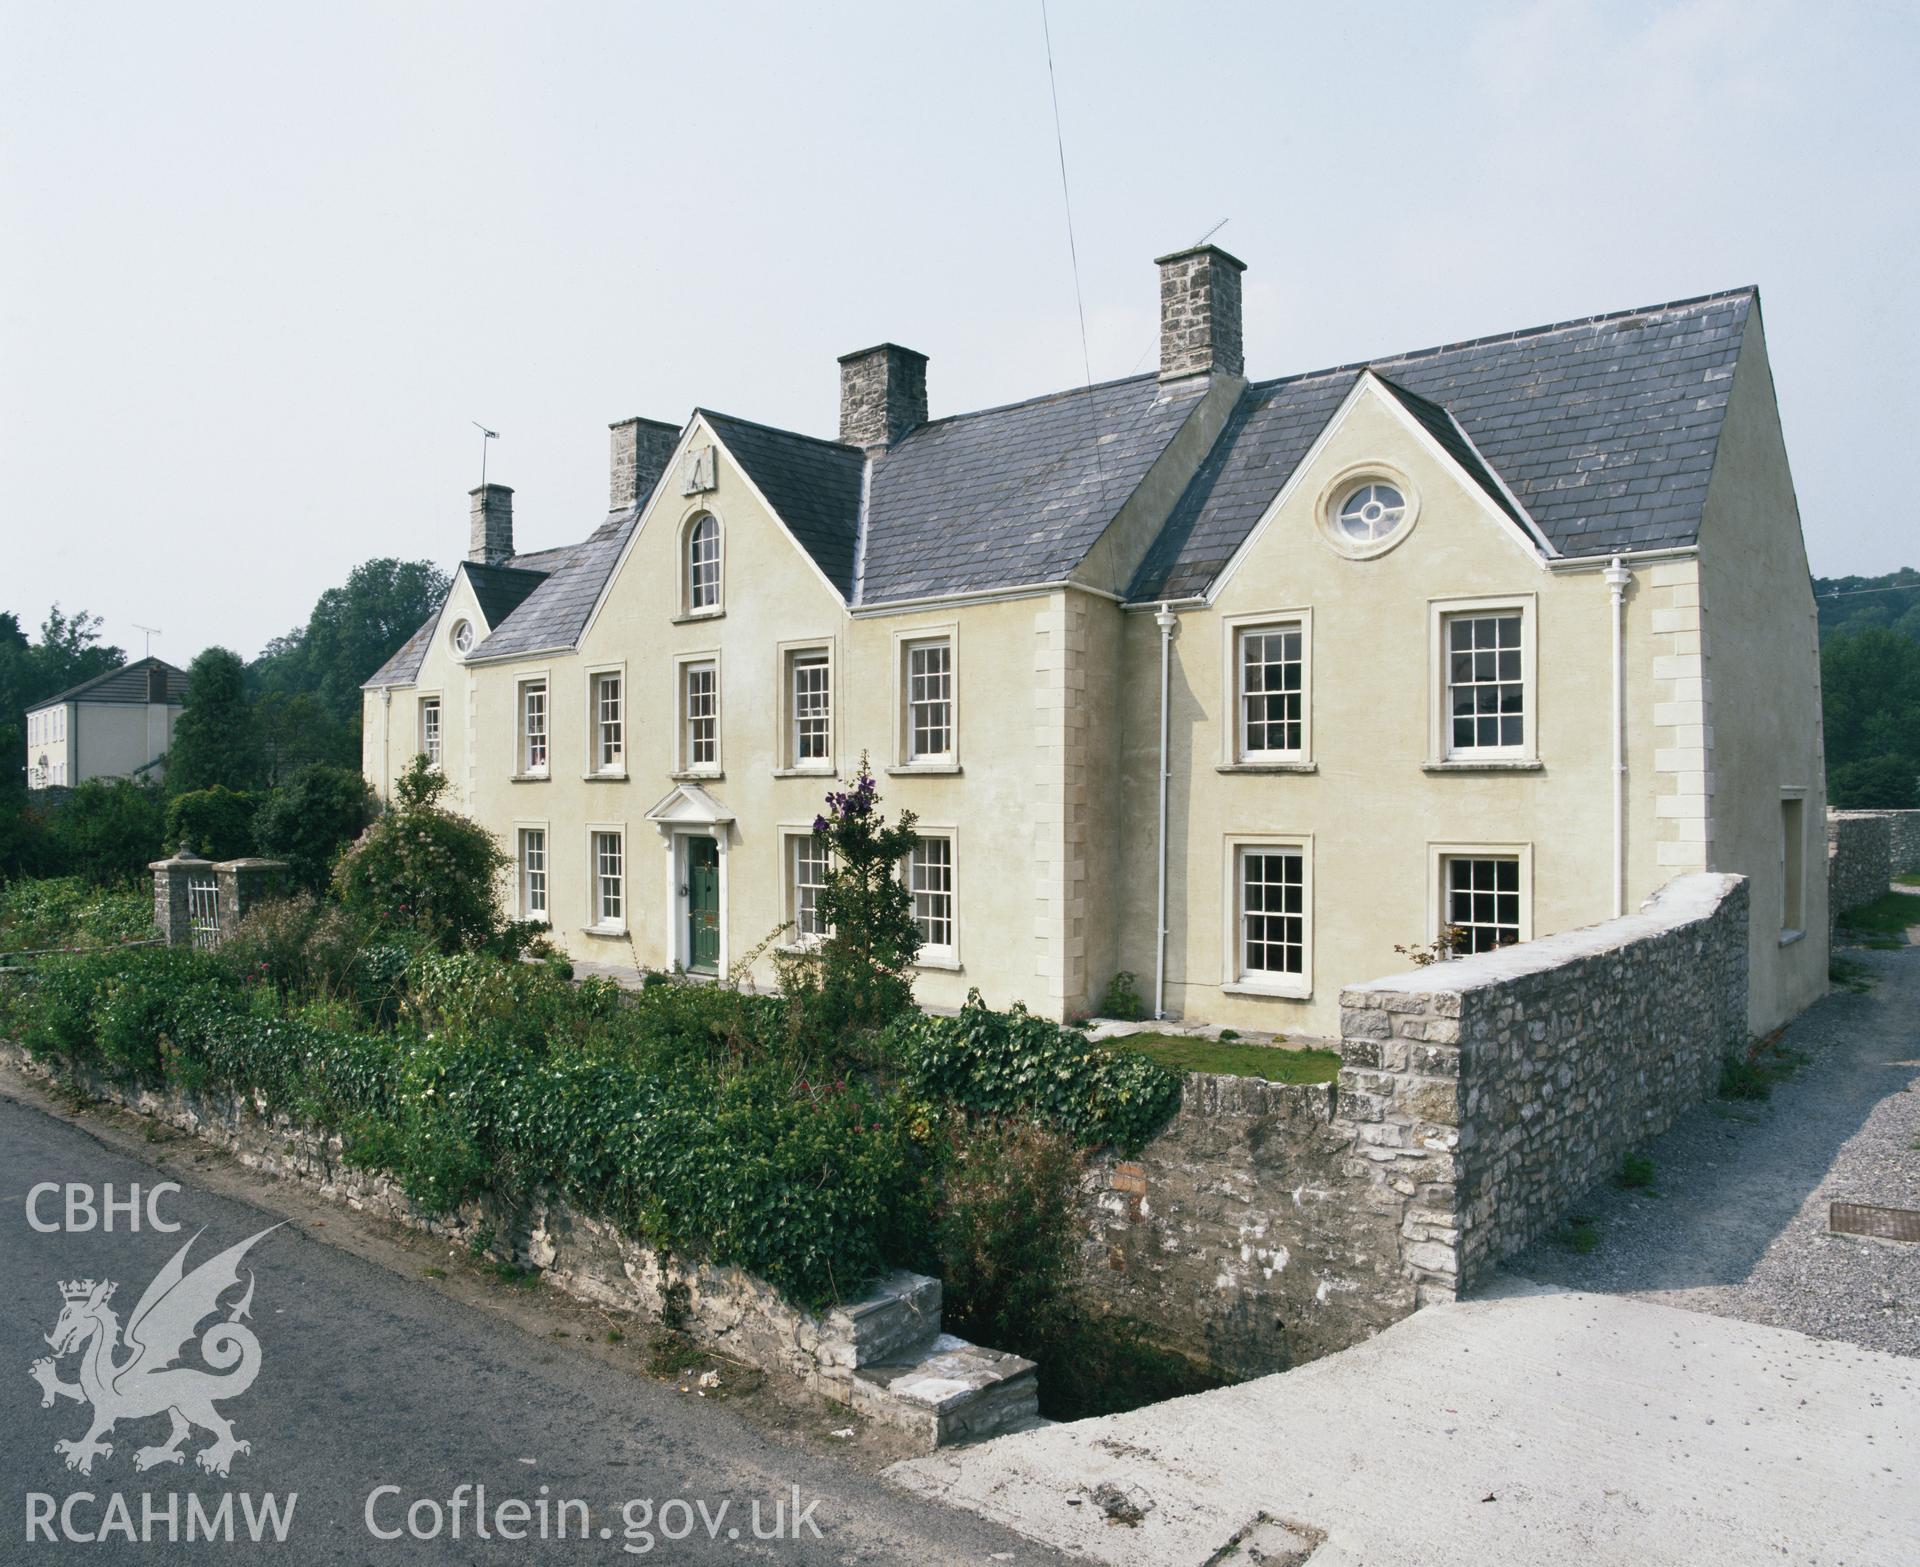 RCAHMW colour transparency of an exterior view of Great House, Llanbethian.